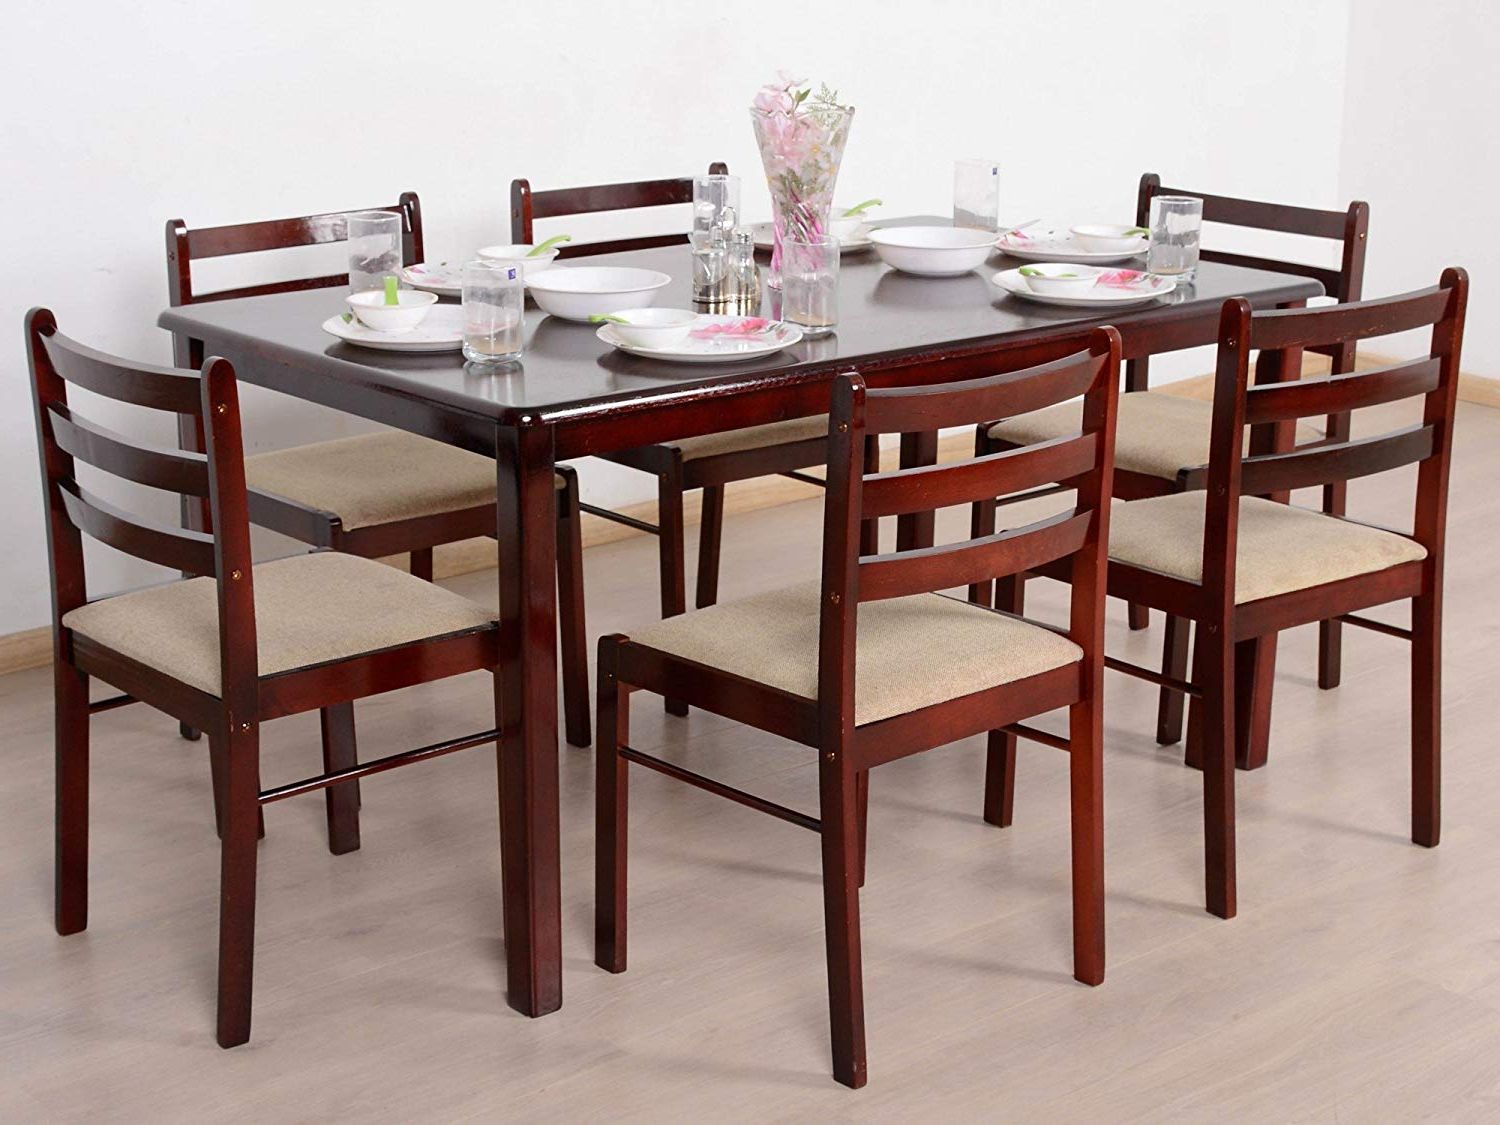 2022 Best of 6 Seater Retangular Wood Contemporary Dining Tables